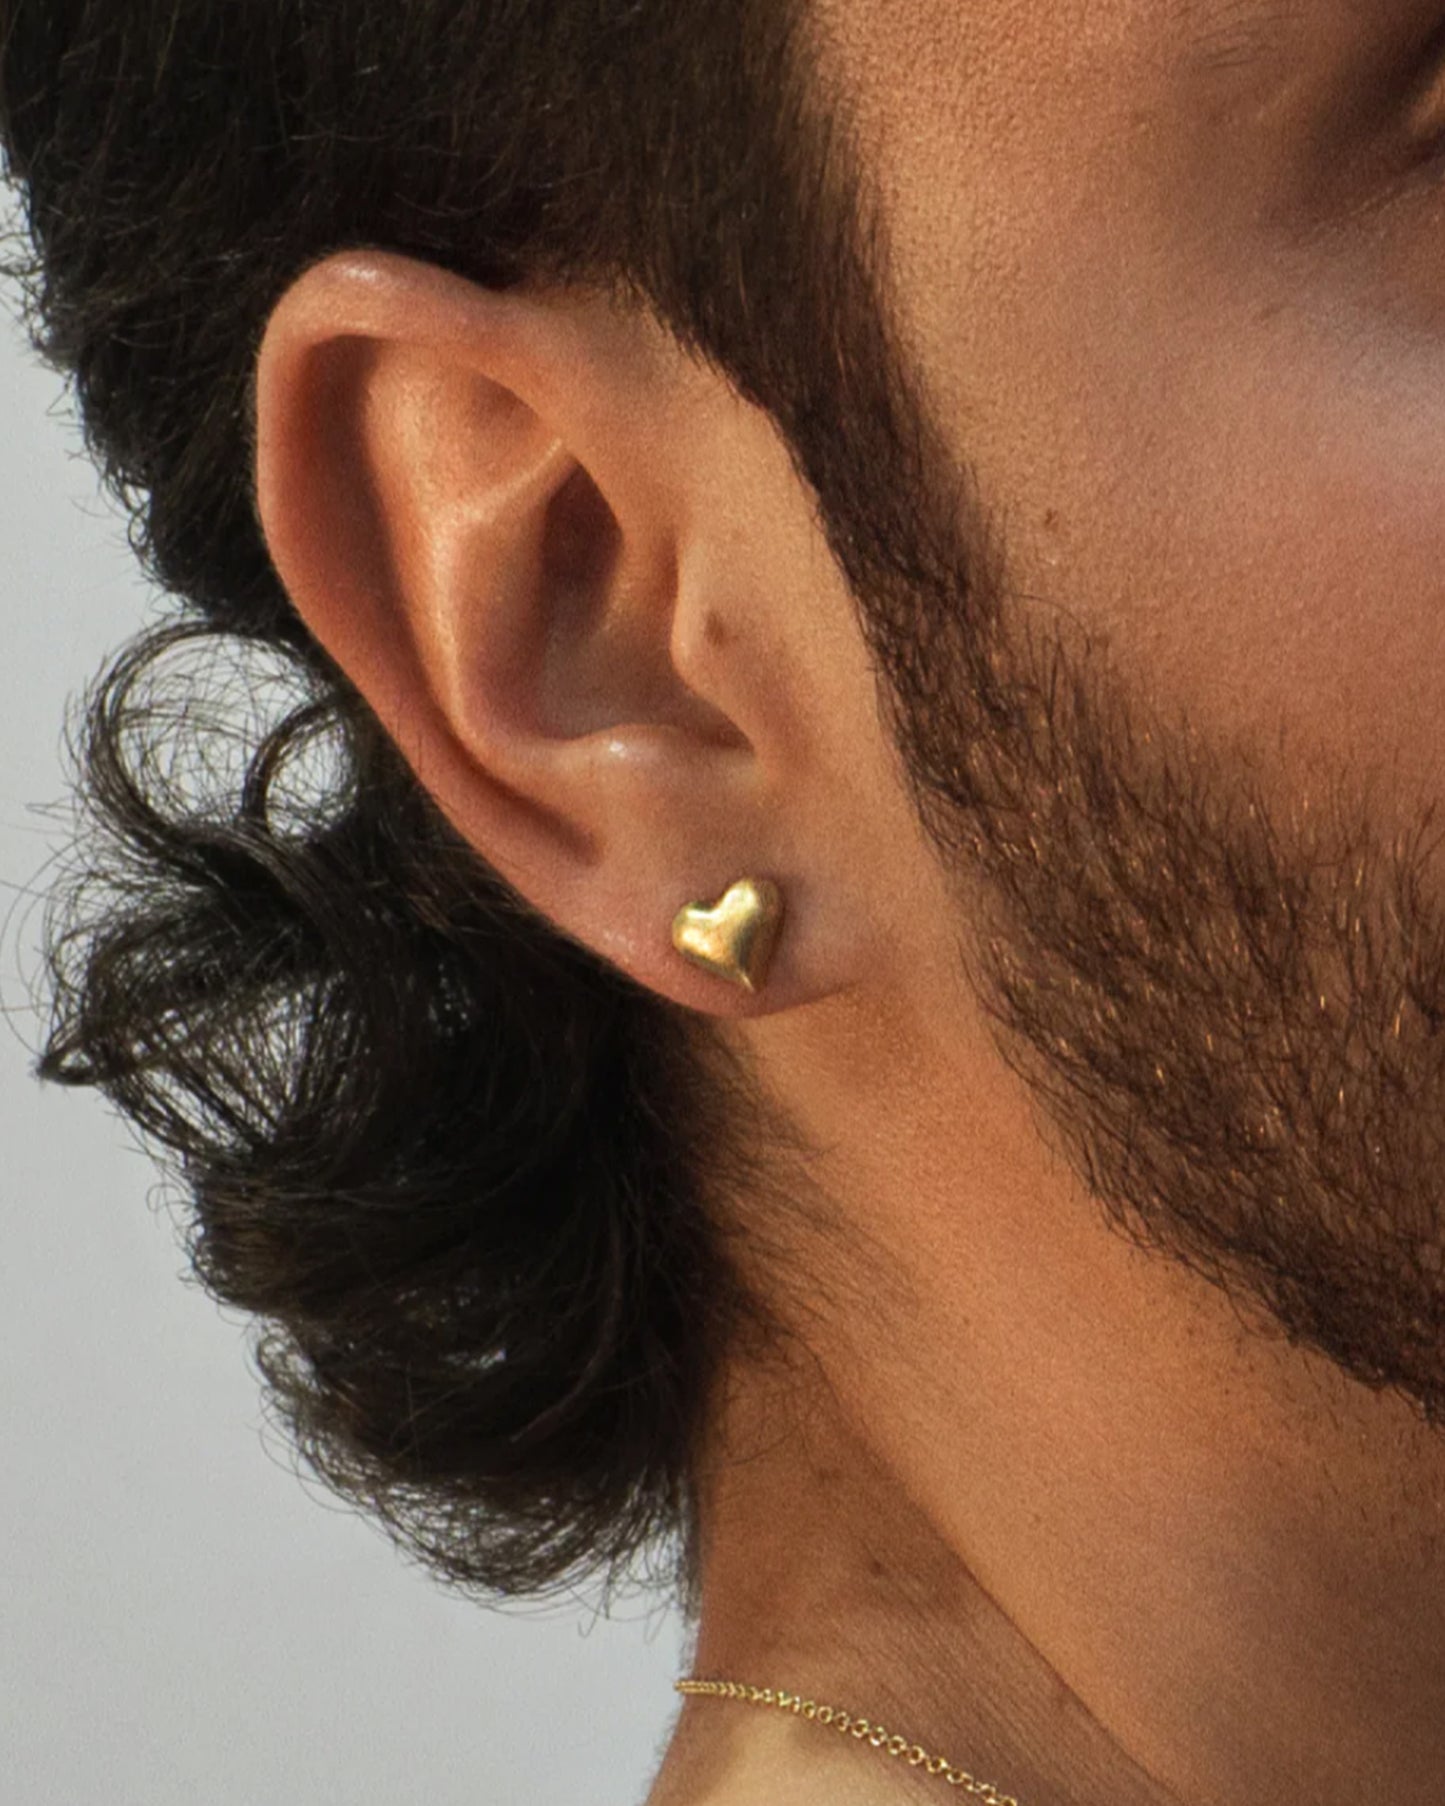 This earring is the most universal symbol of love.